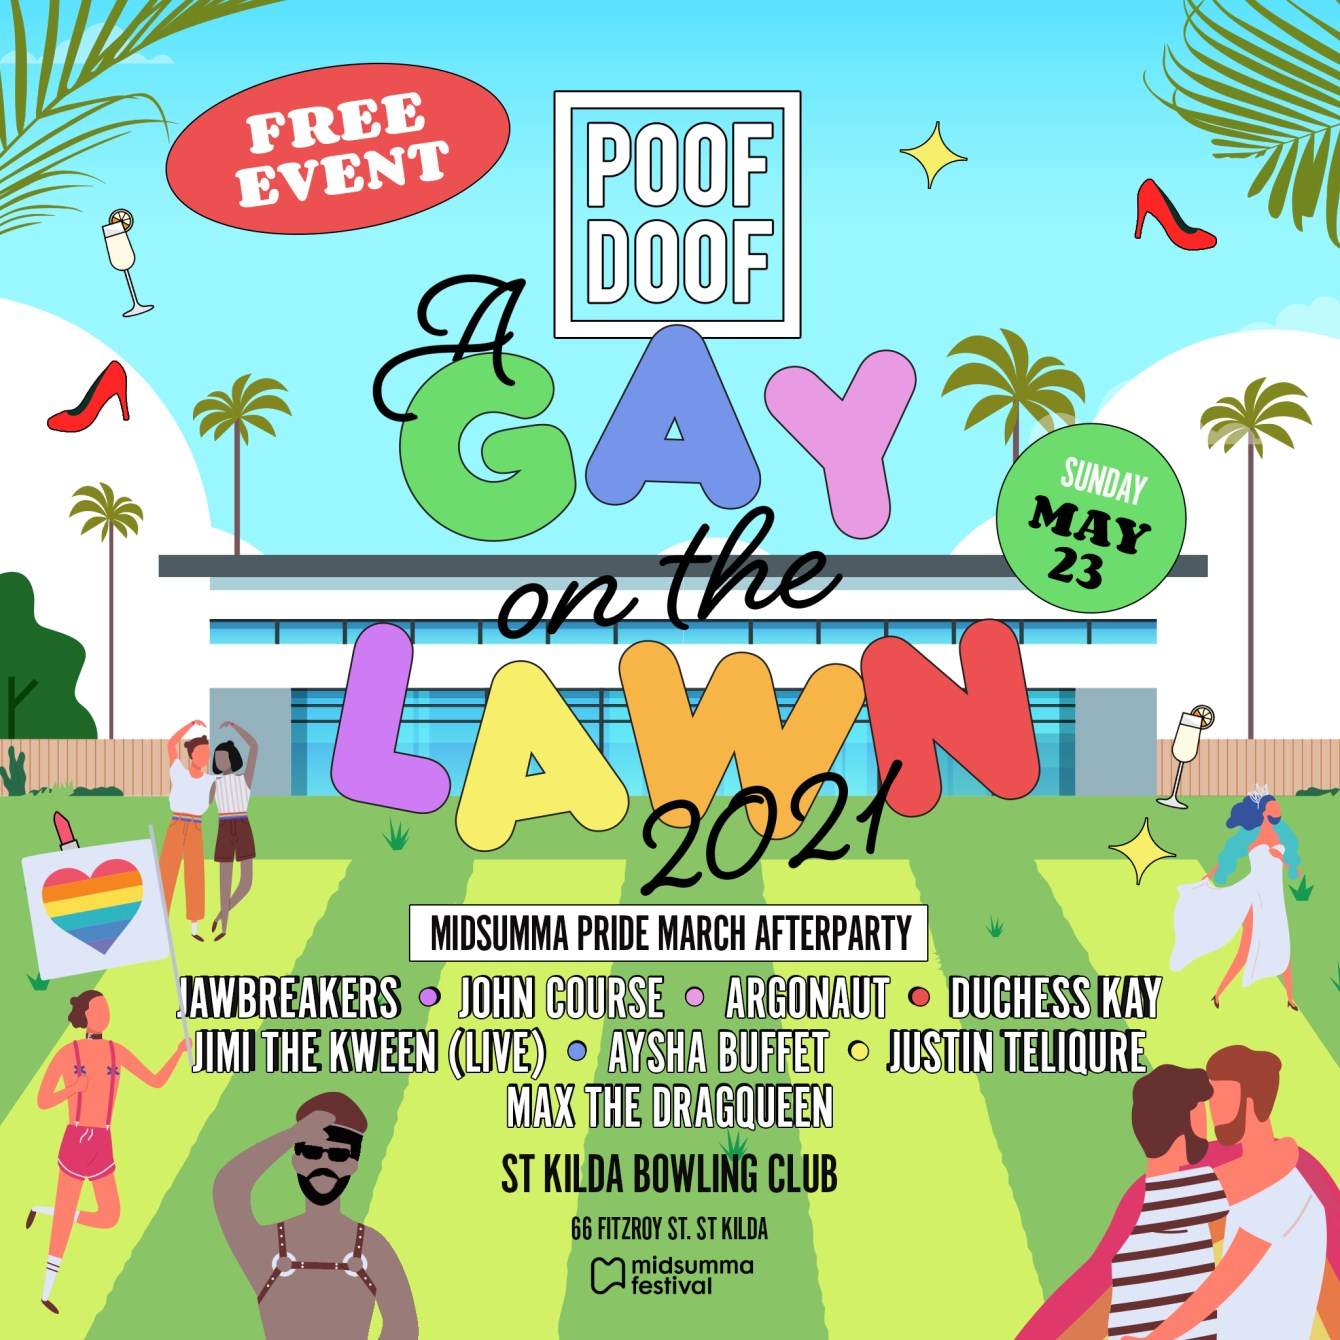 Poof Doof Melbourne: A Gay On The Lawn - フライヤー表